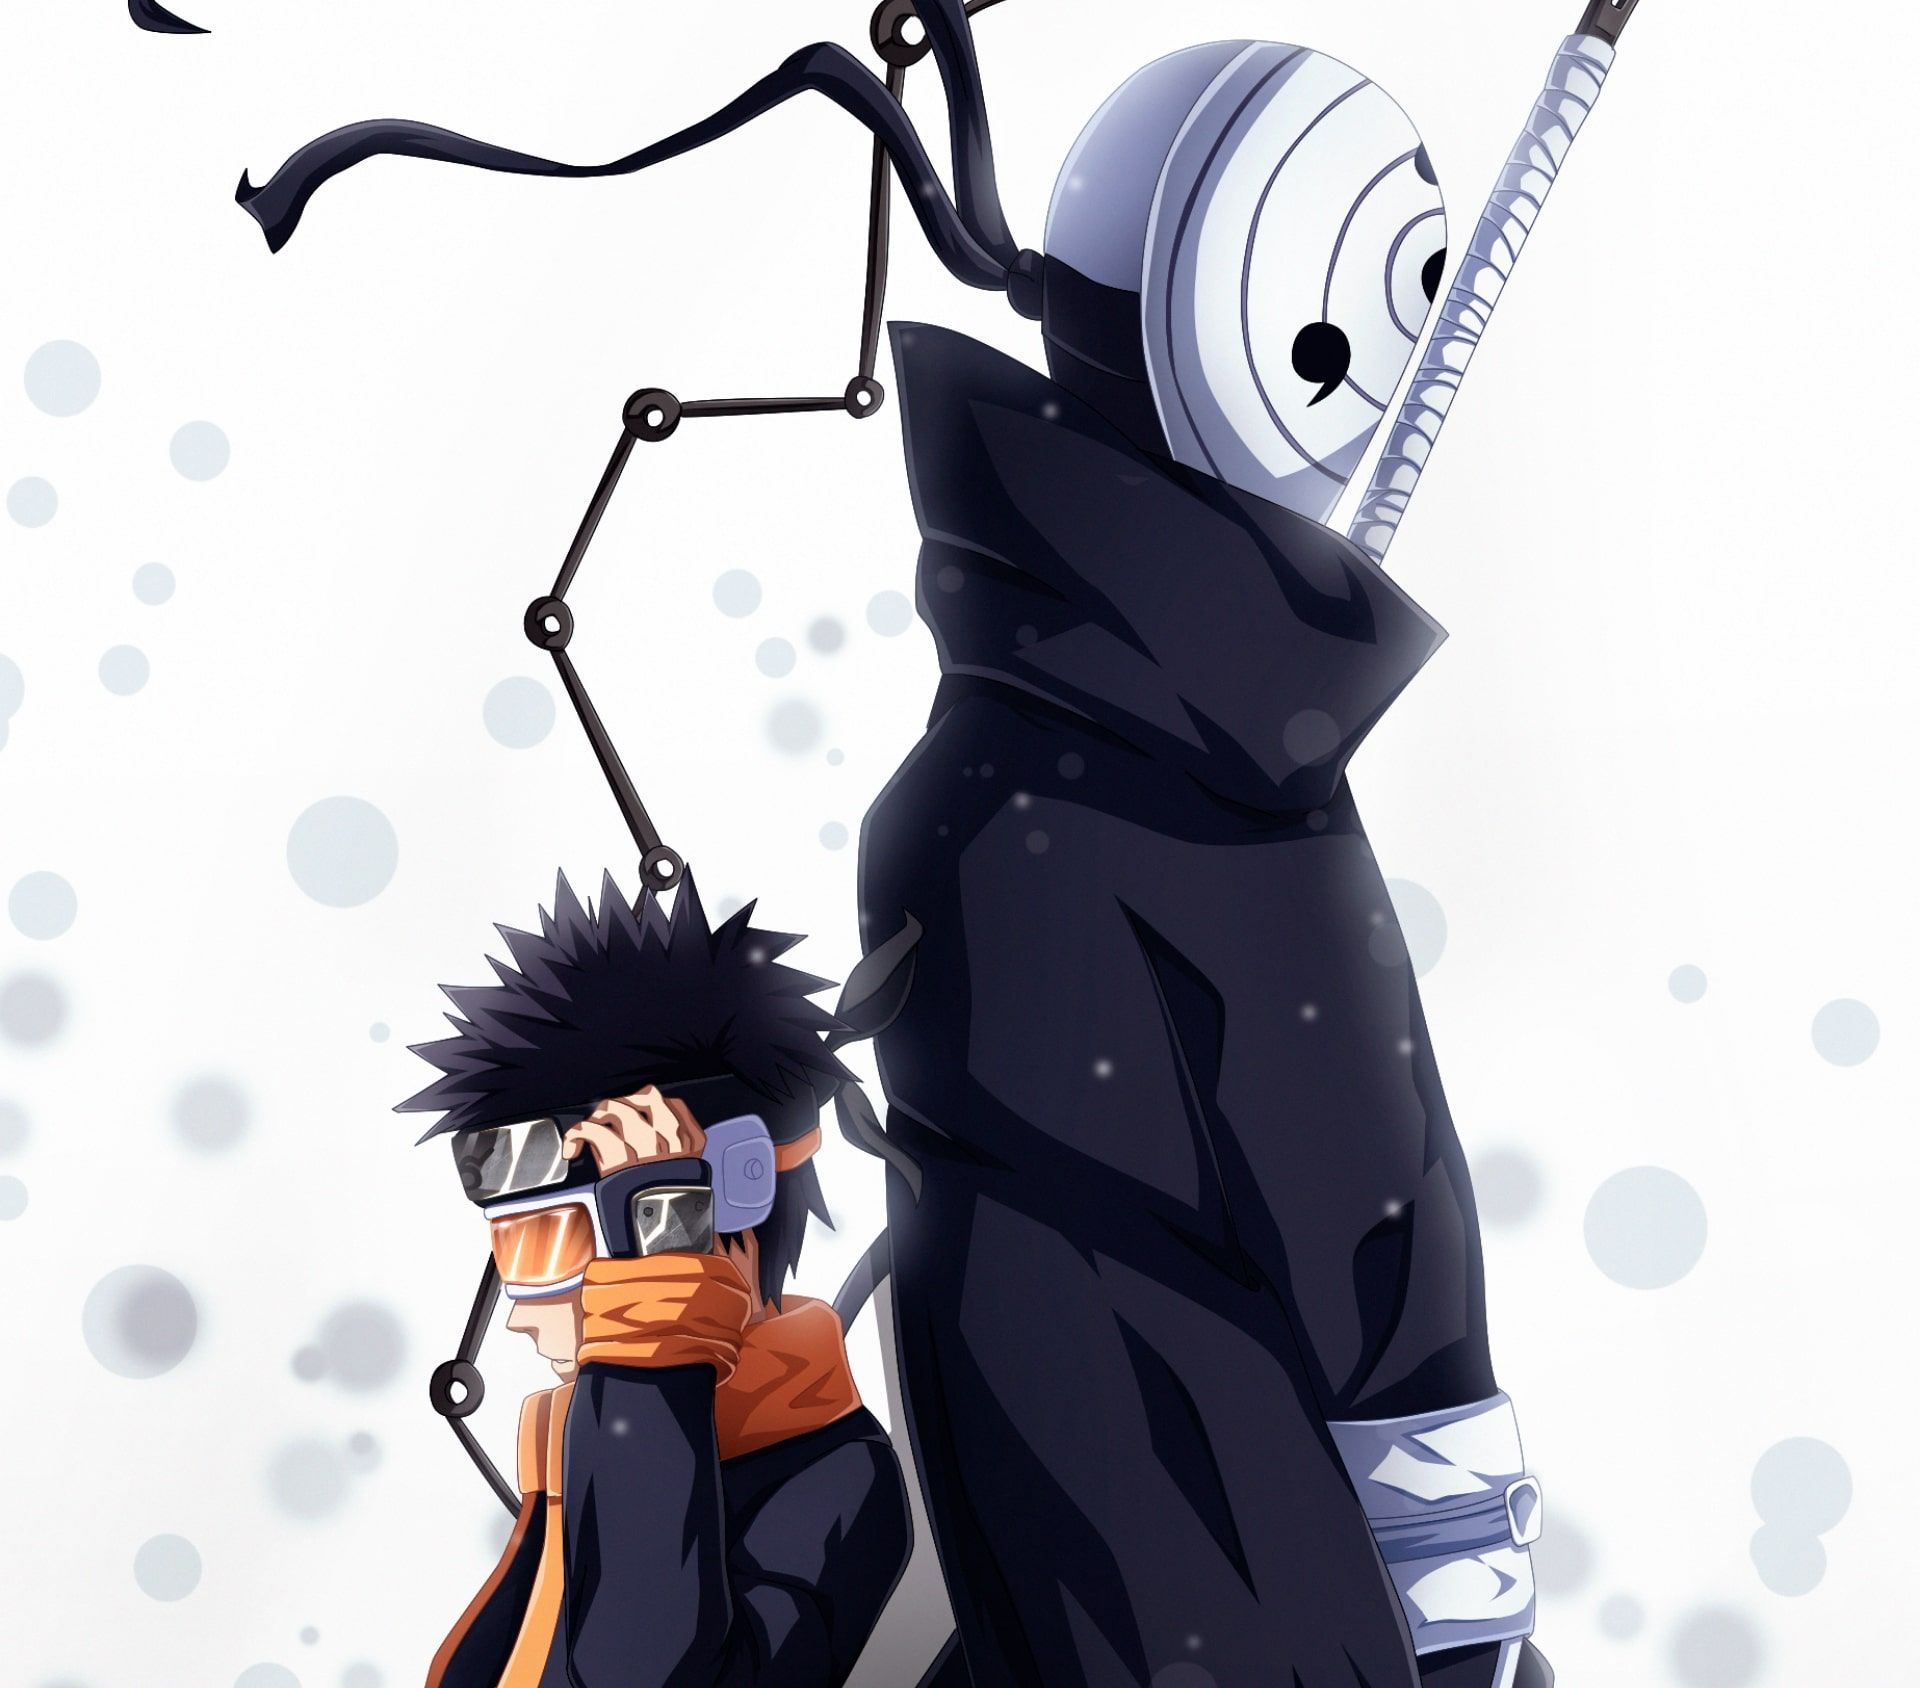 1152x864 Obito Uchiha With Guru Wallpaper,1152x864 Resolution HD 4k  Wallpapers,Images,Backgrounds,Photos and Pictures